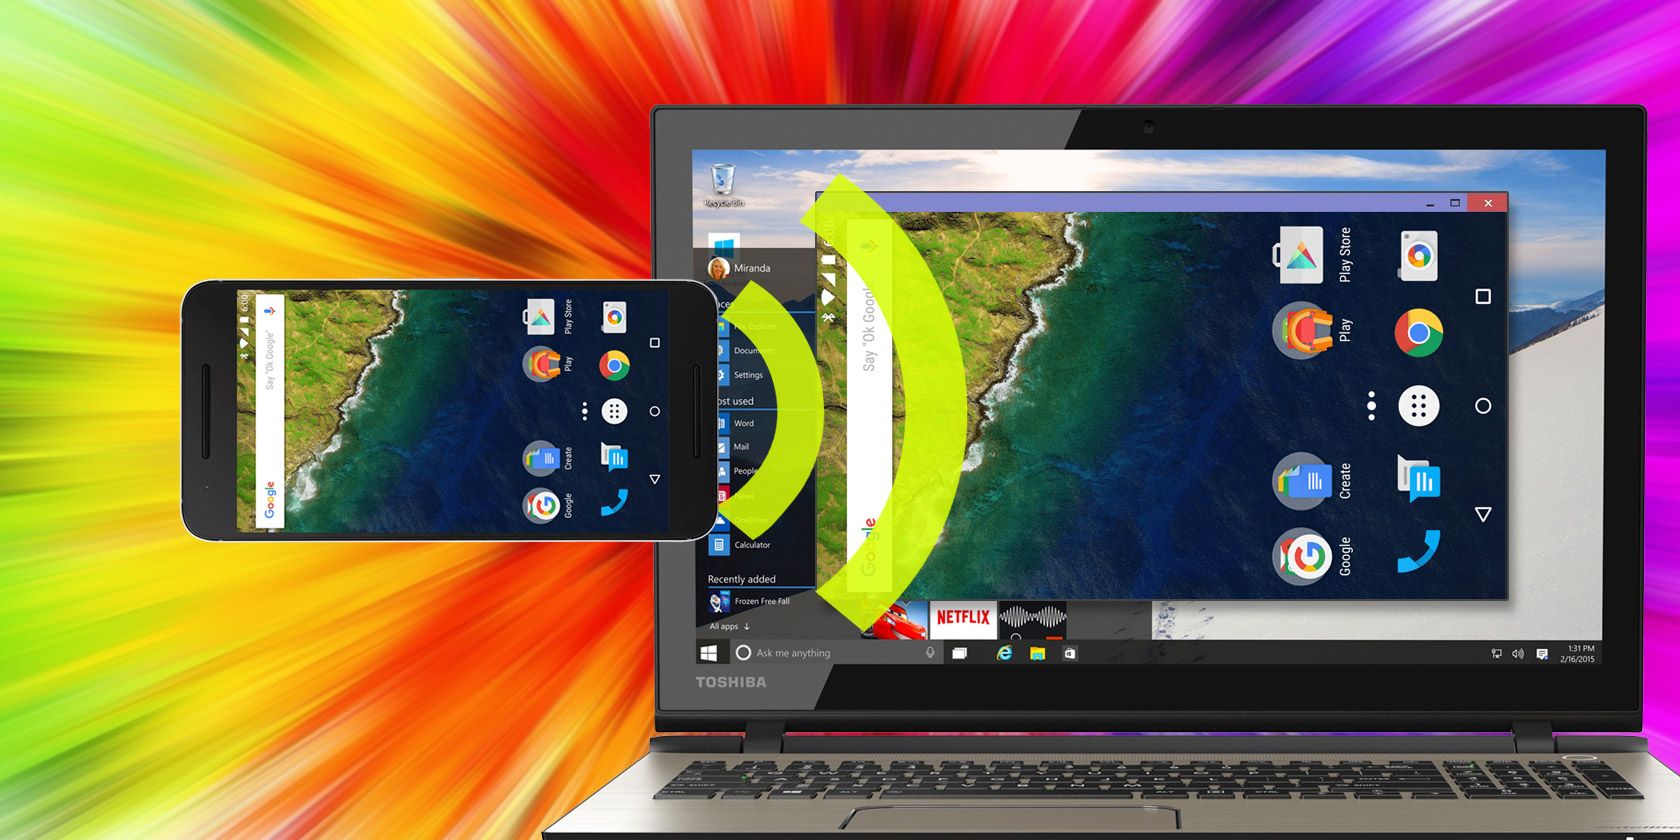 How to Cast Your Android Screen to Windows 10 With Miracast and Connect